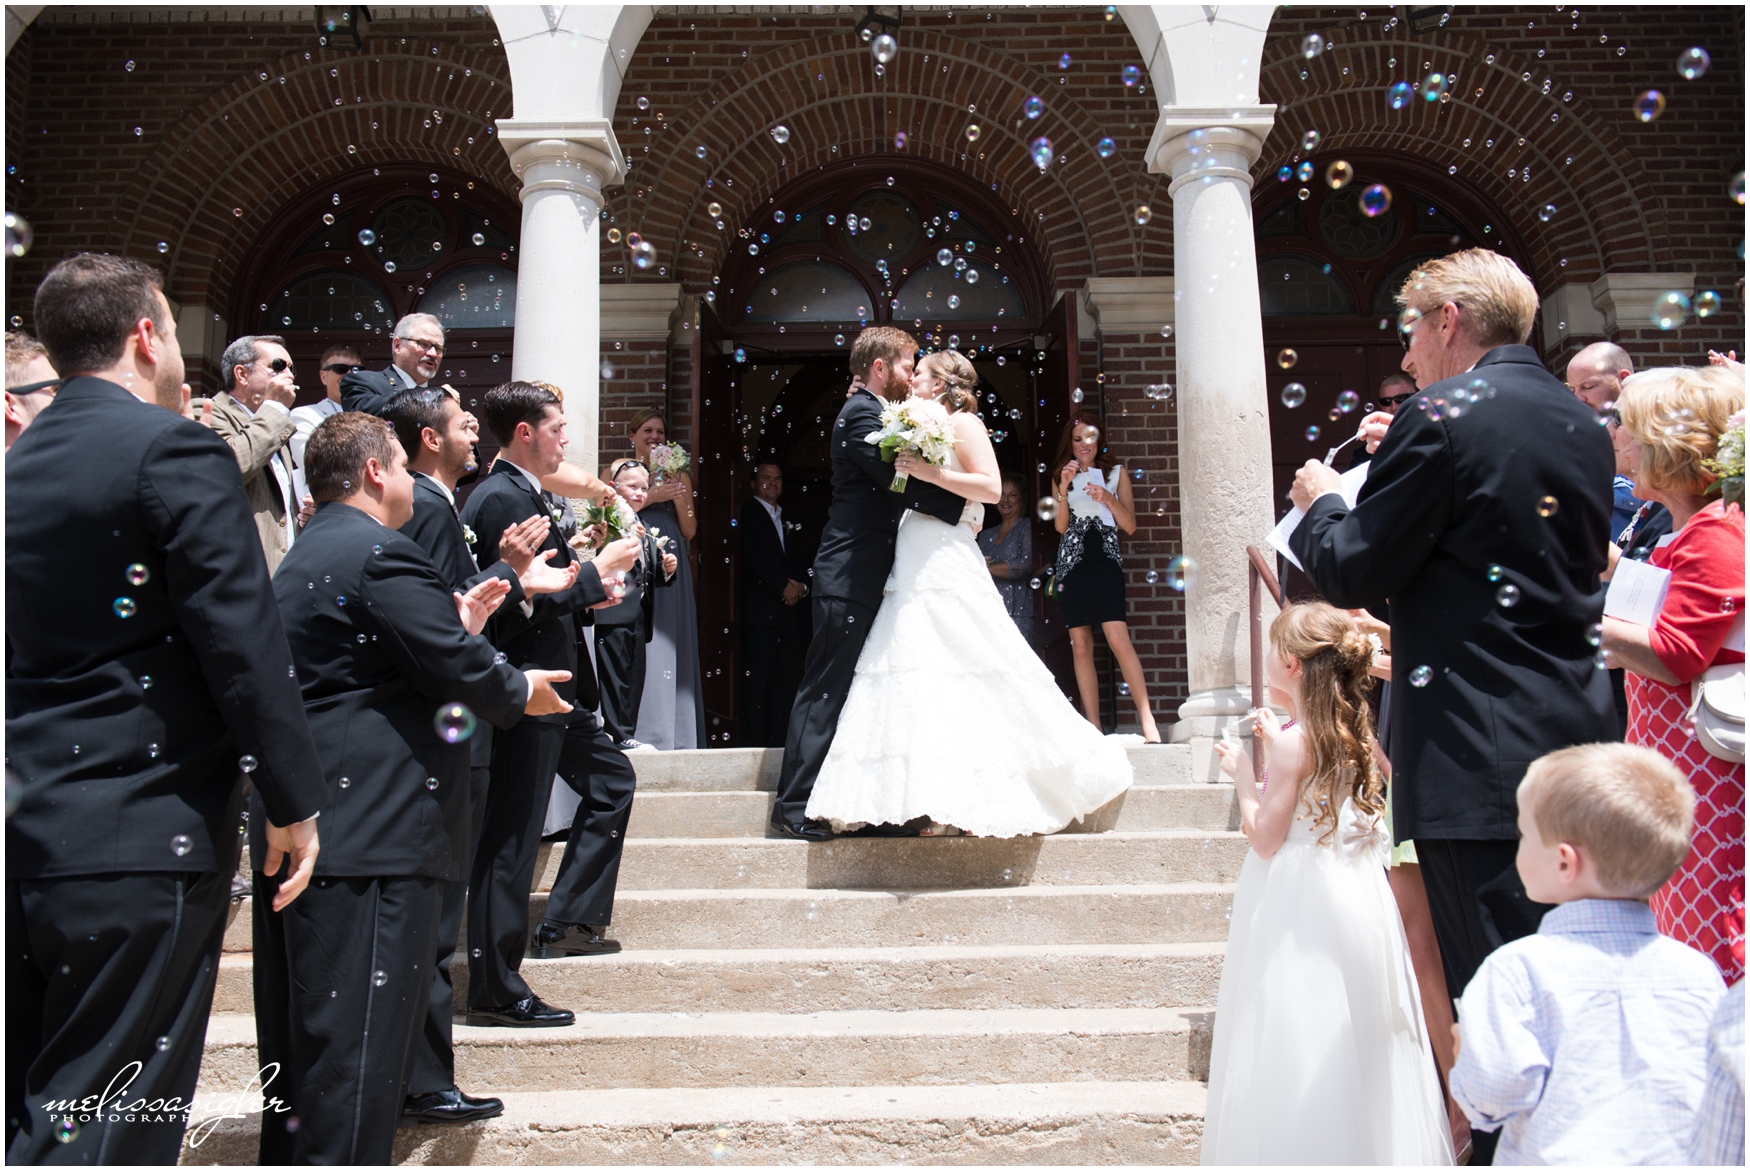 Wedding bubble exit in front of St Johns Catholic church in Lawrence Kansas by Melissa Sigler Photography